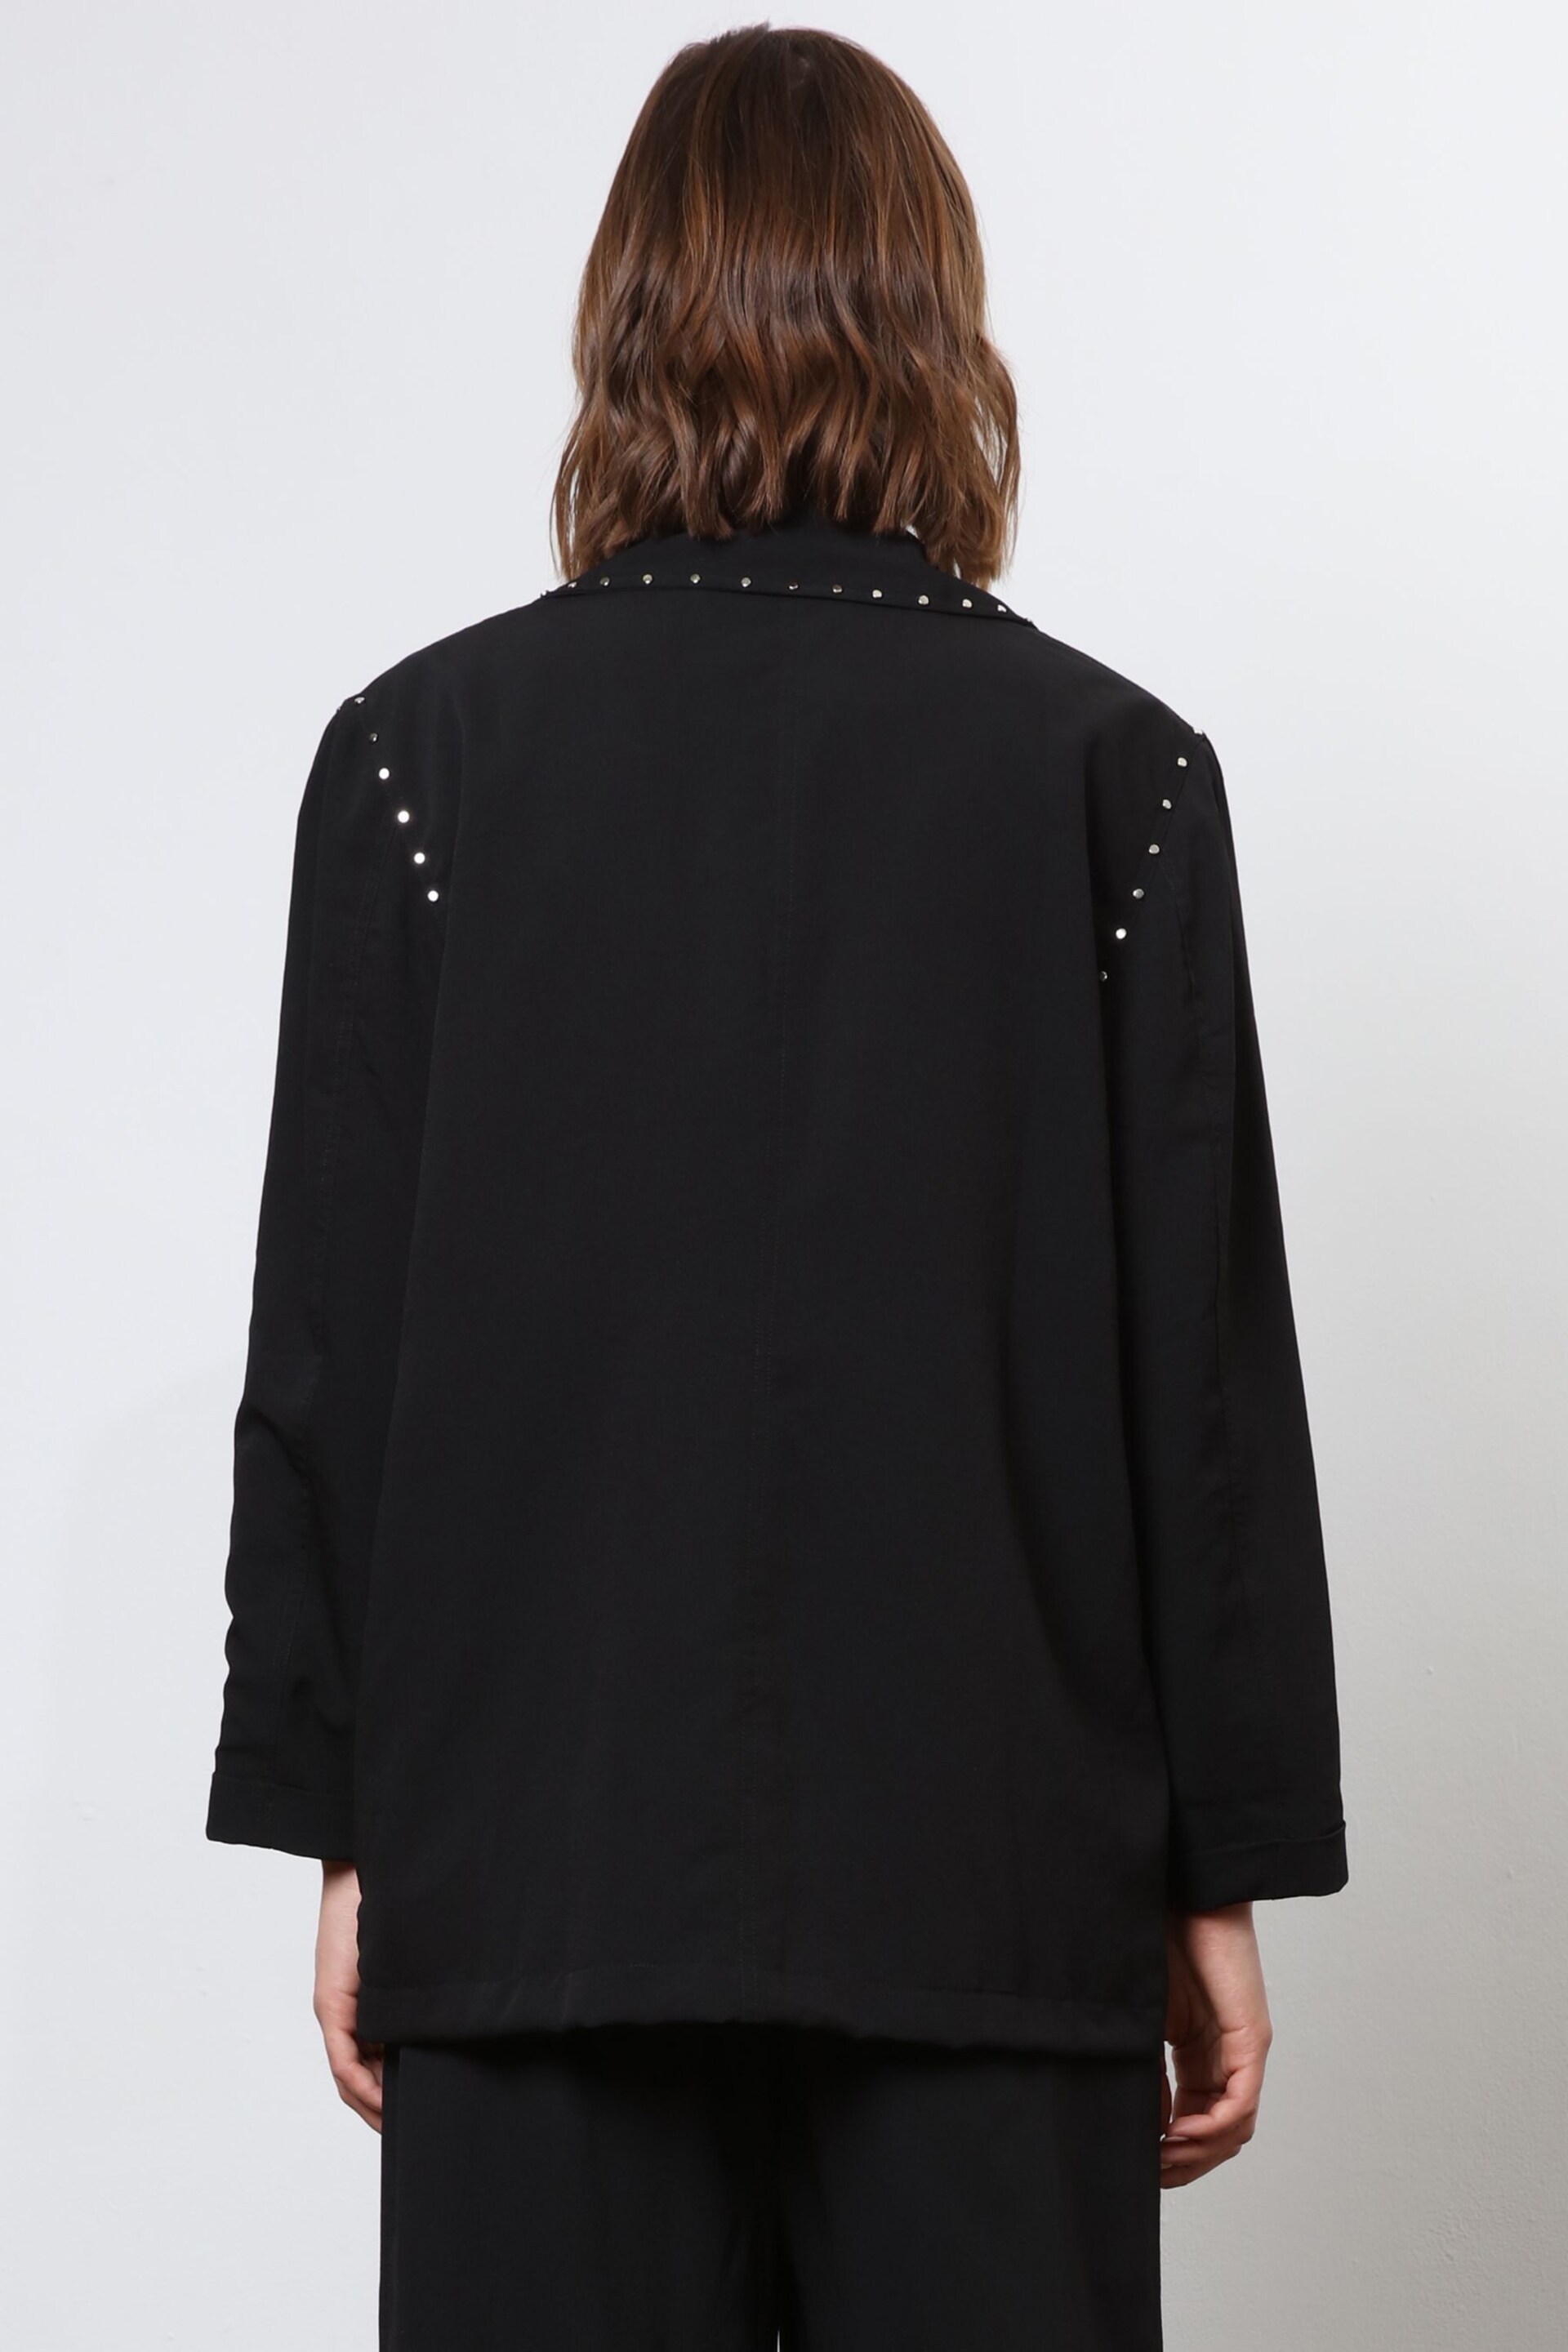 Religion Black Lightweight Casual Blazer With Stud Trims - Image 3 of 6